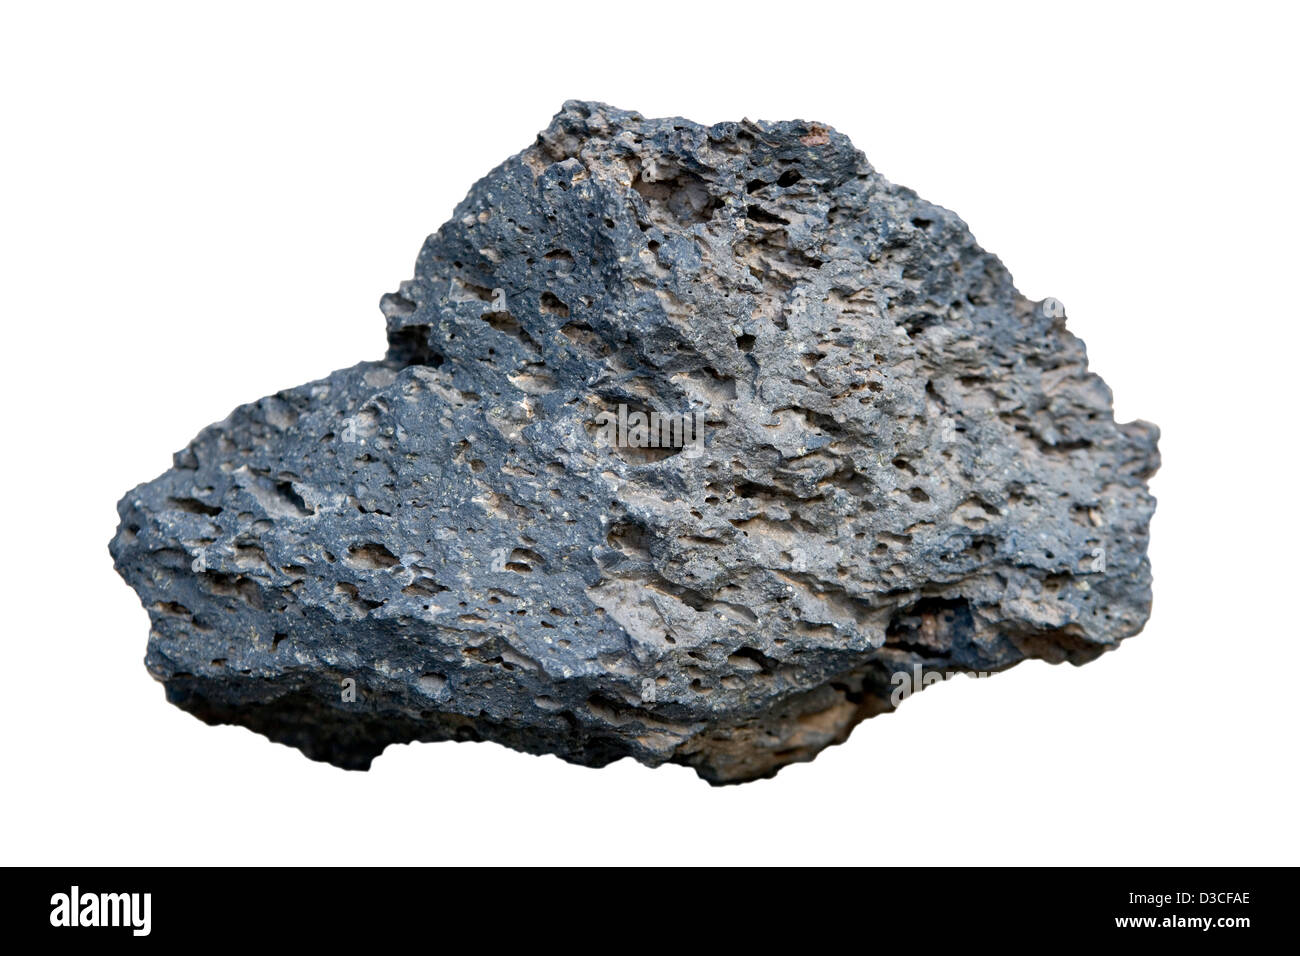 A piece of lava found along the Colorado river in the Grand Canyon Stock Photo